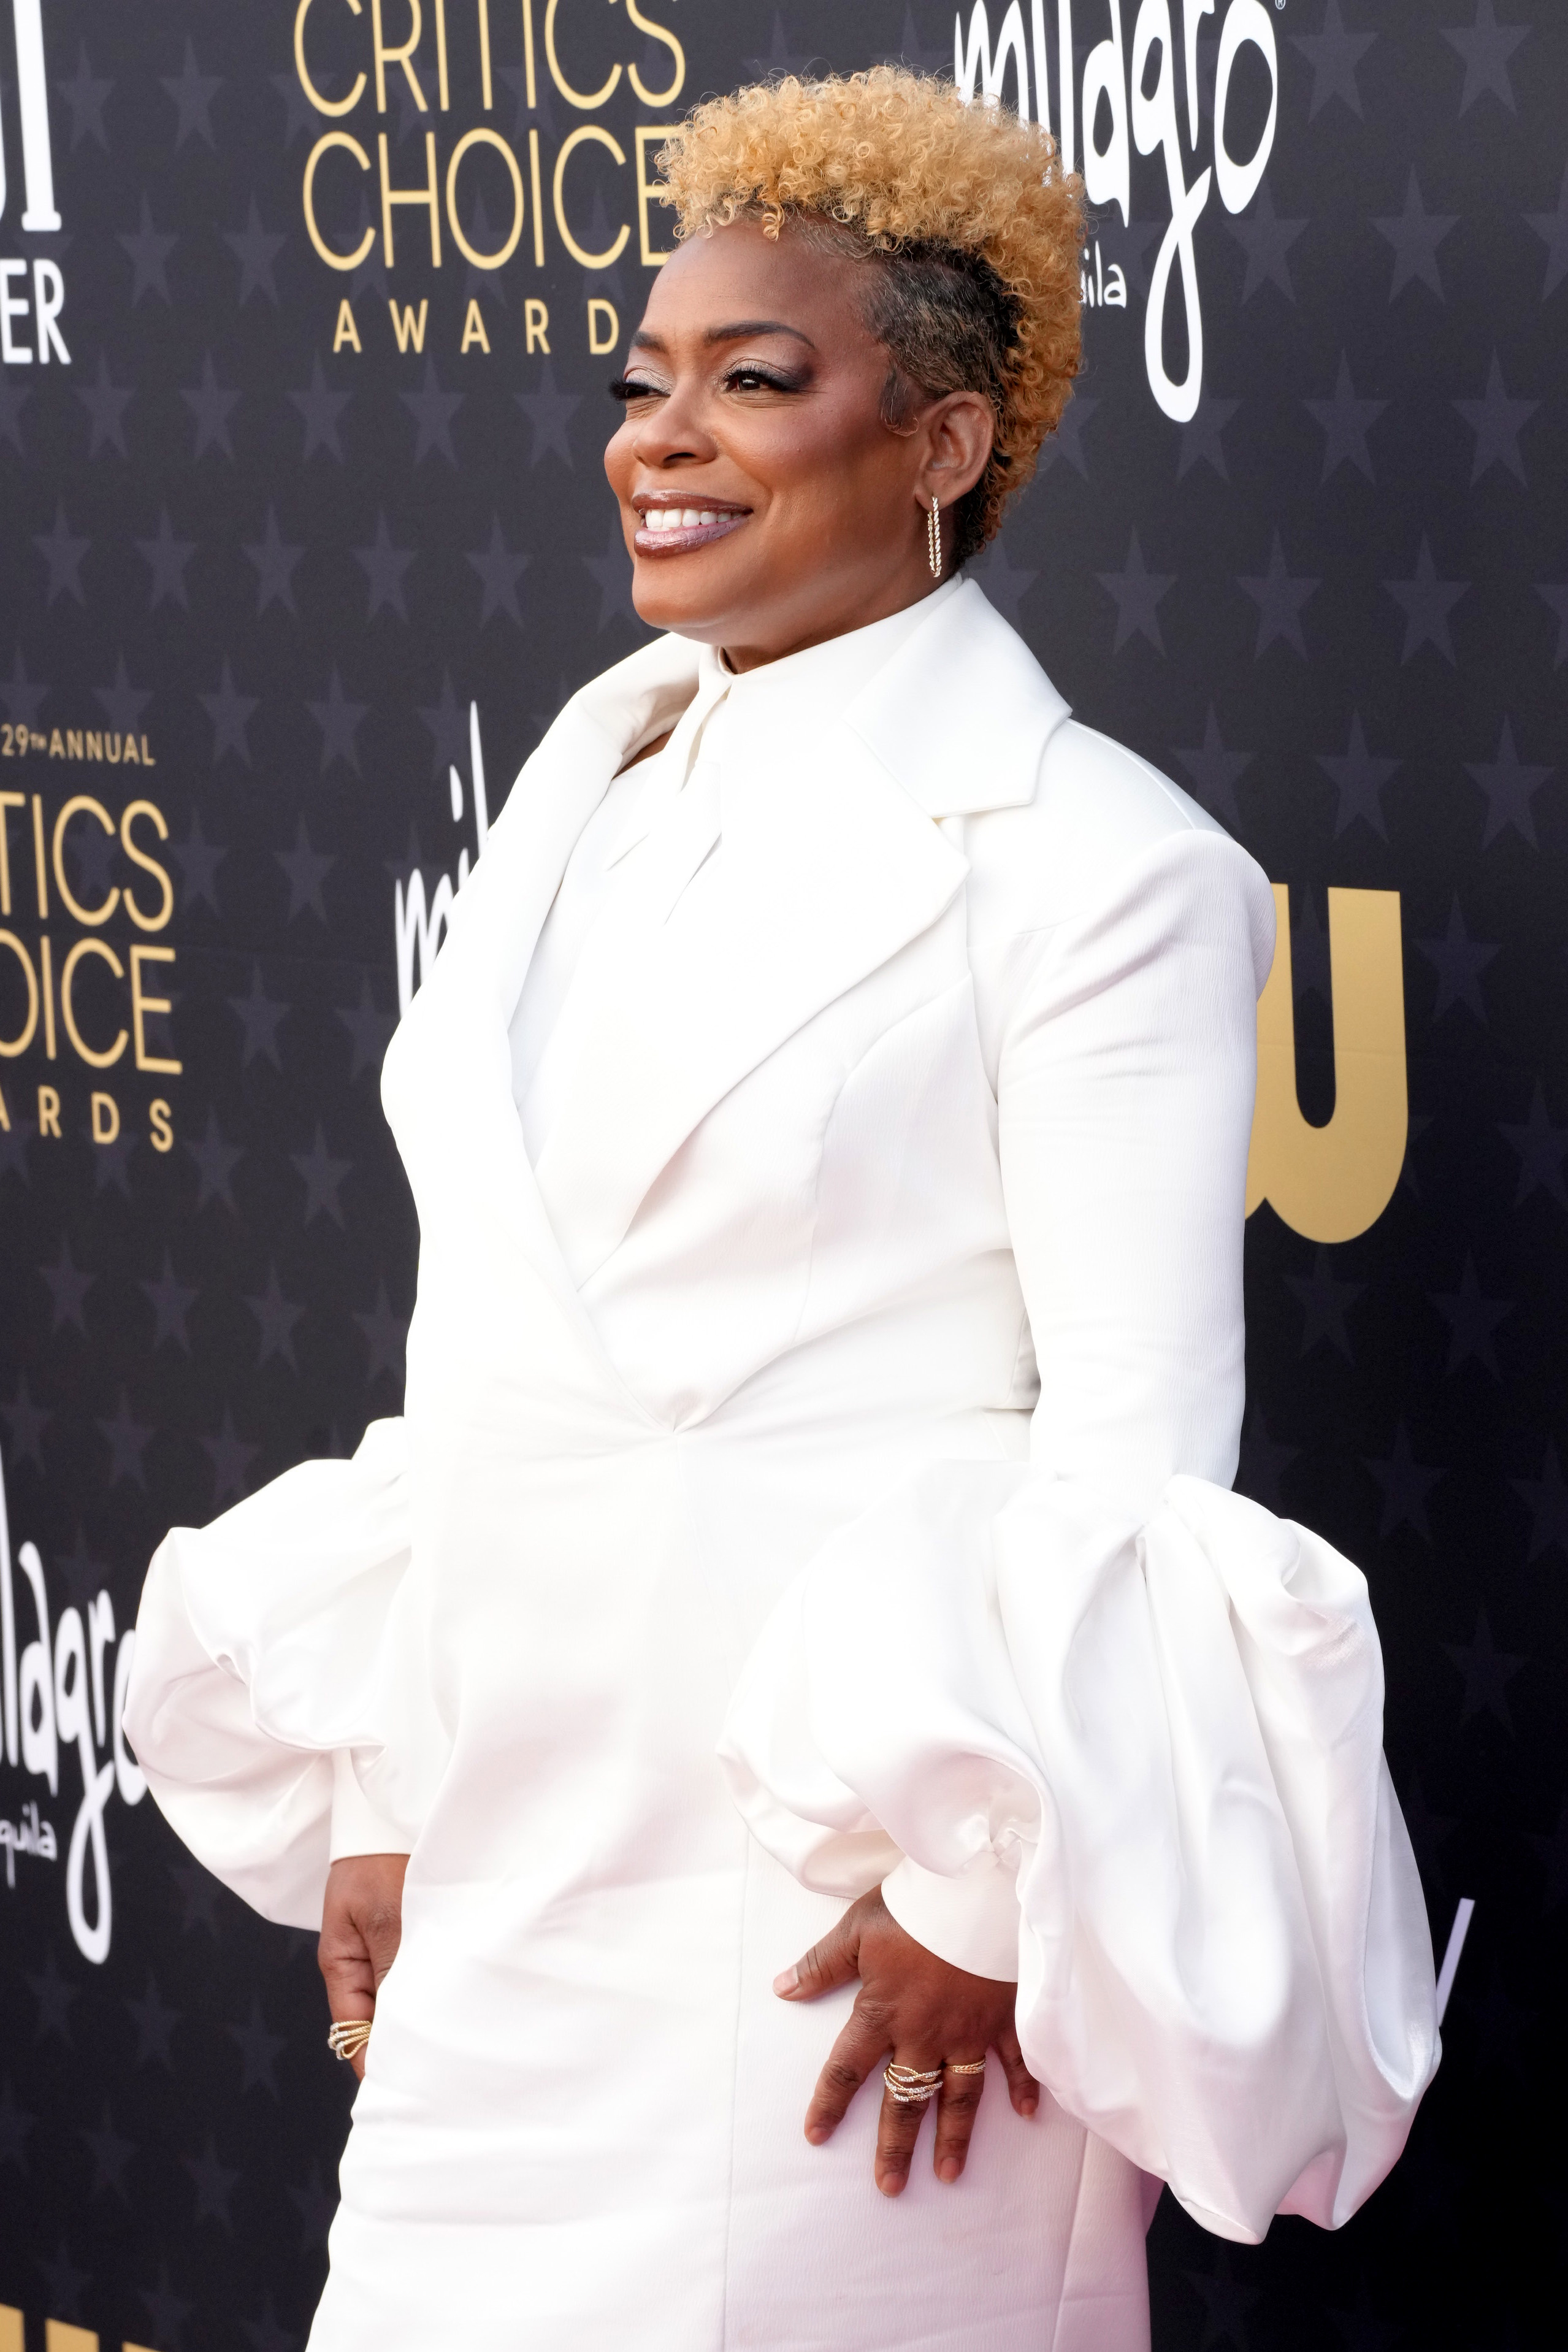 Aunjanue Ellis-Taylor in a suit with large ruffle detail posing in front of the Critics&#x27; Choice Award backdrop